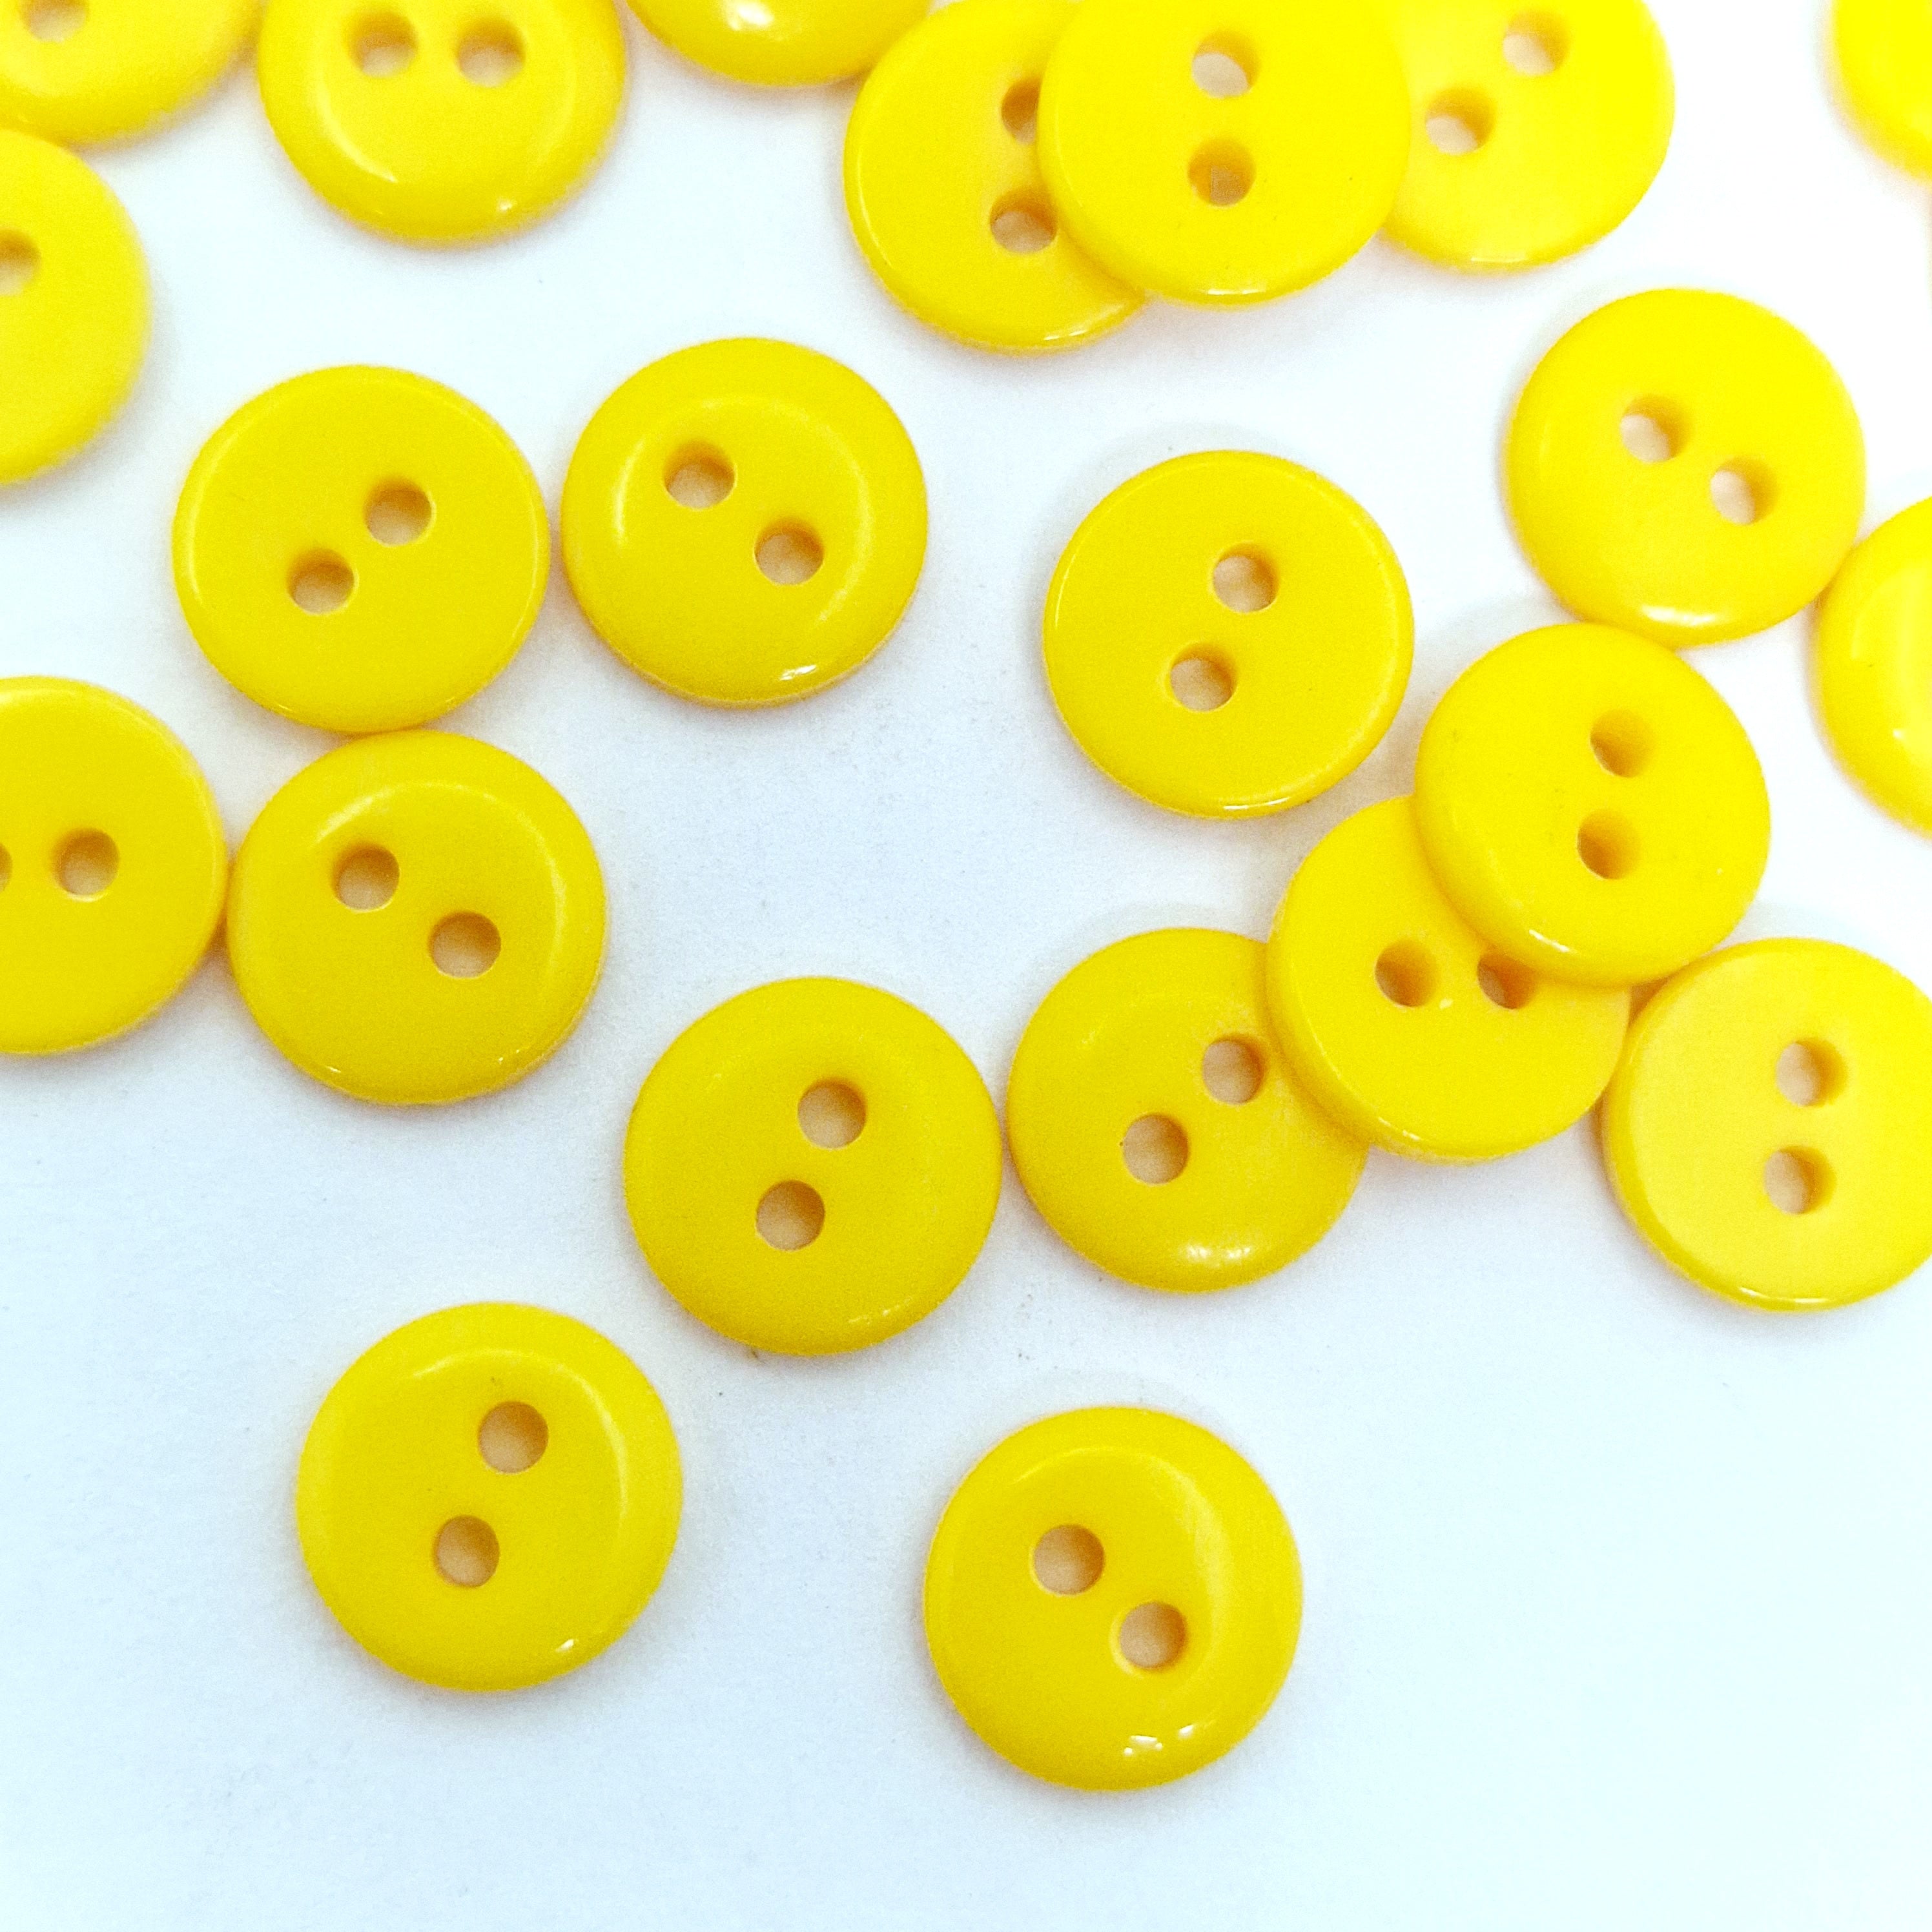 MajorCrafts 120pcs 9mm Mustard Yellow Small 2 Holes Round Resin Sewing Buttons B09